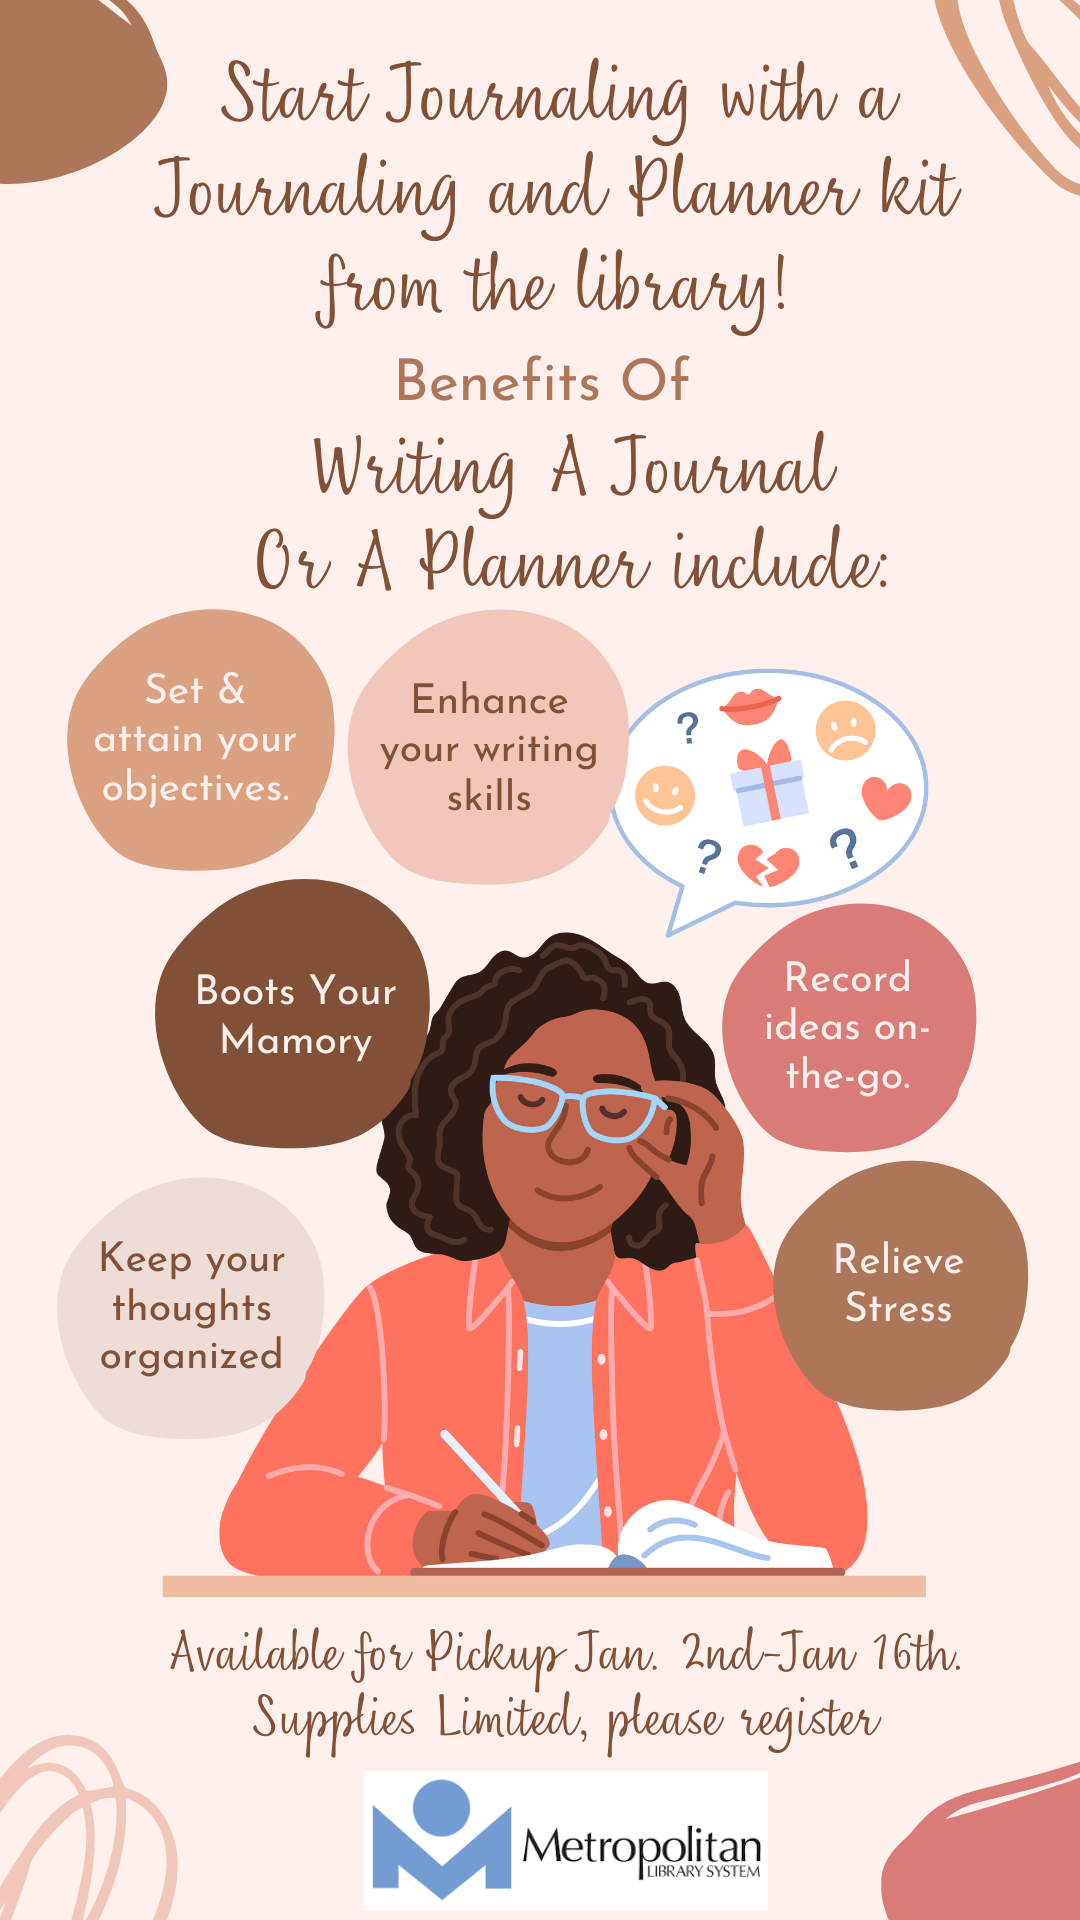 Start Journaling with a Journaling and Planner kit from the library! There is a woman pictured writing in a journal